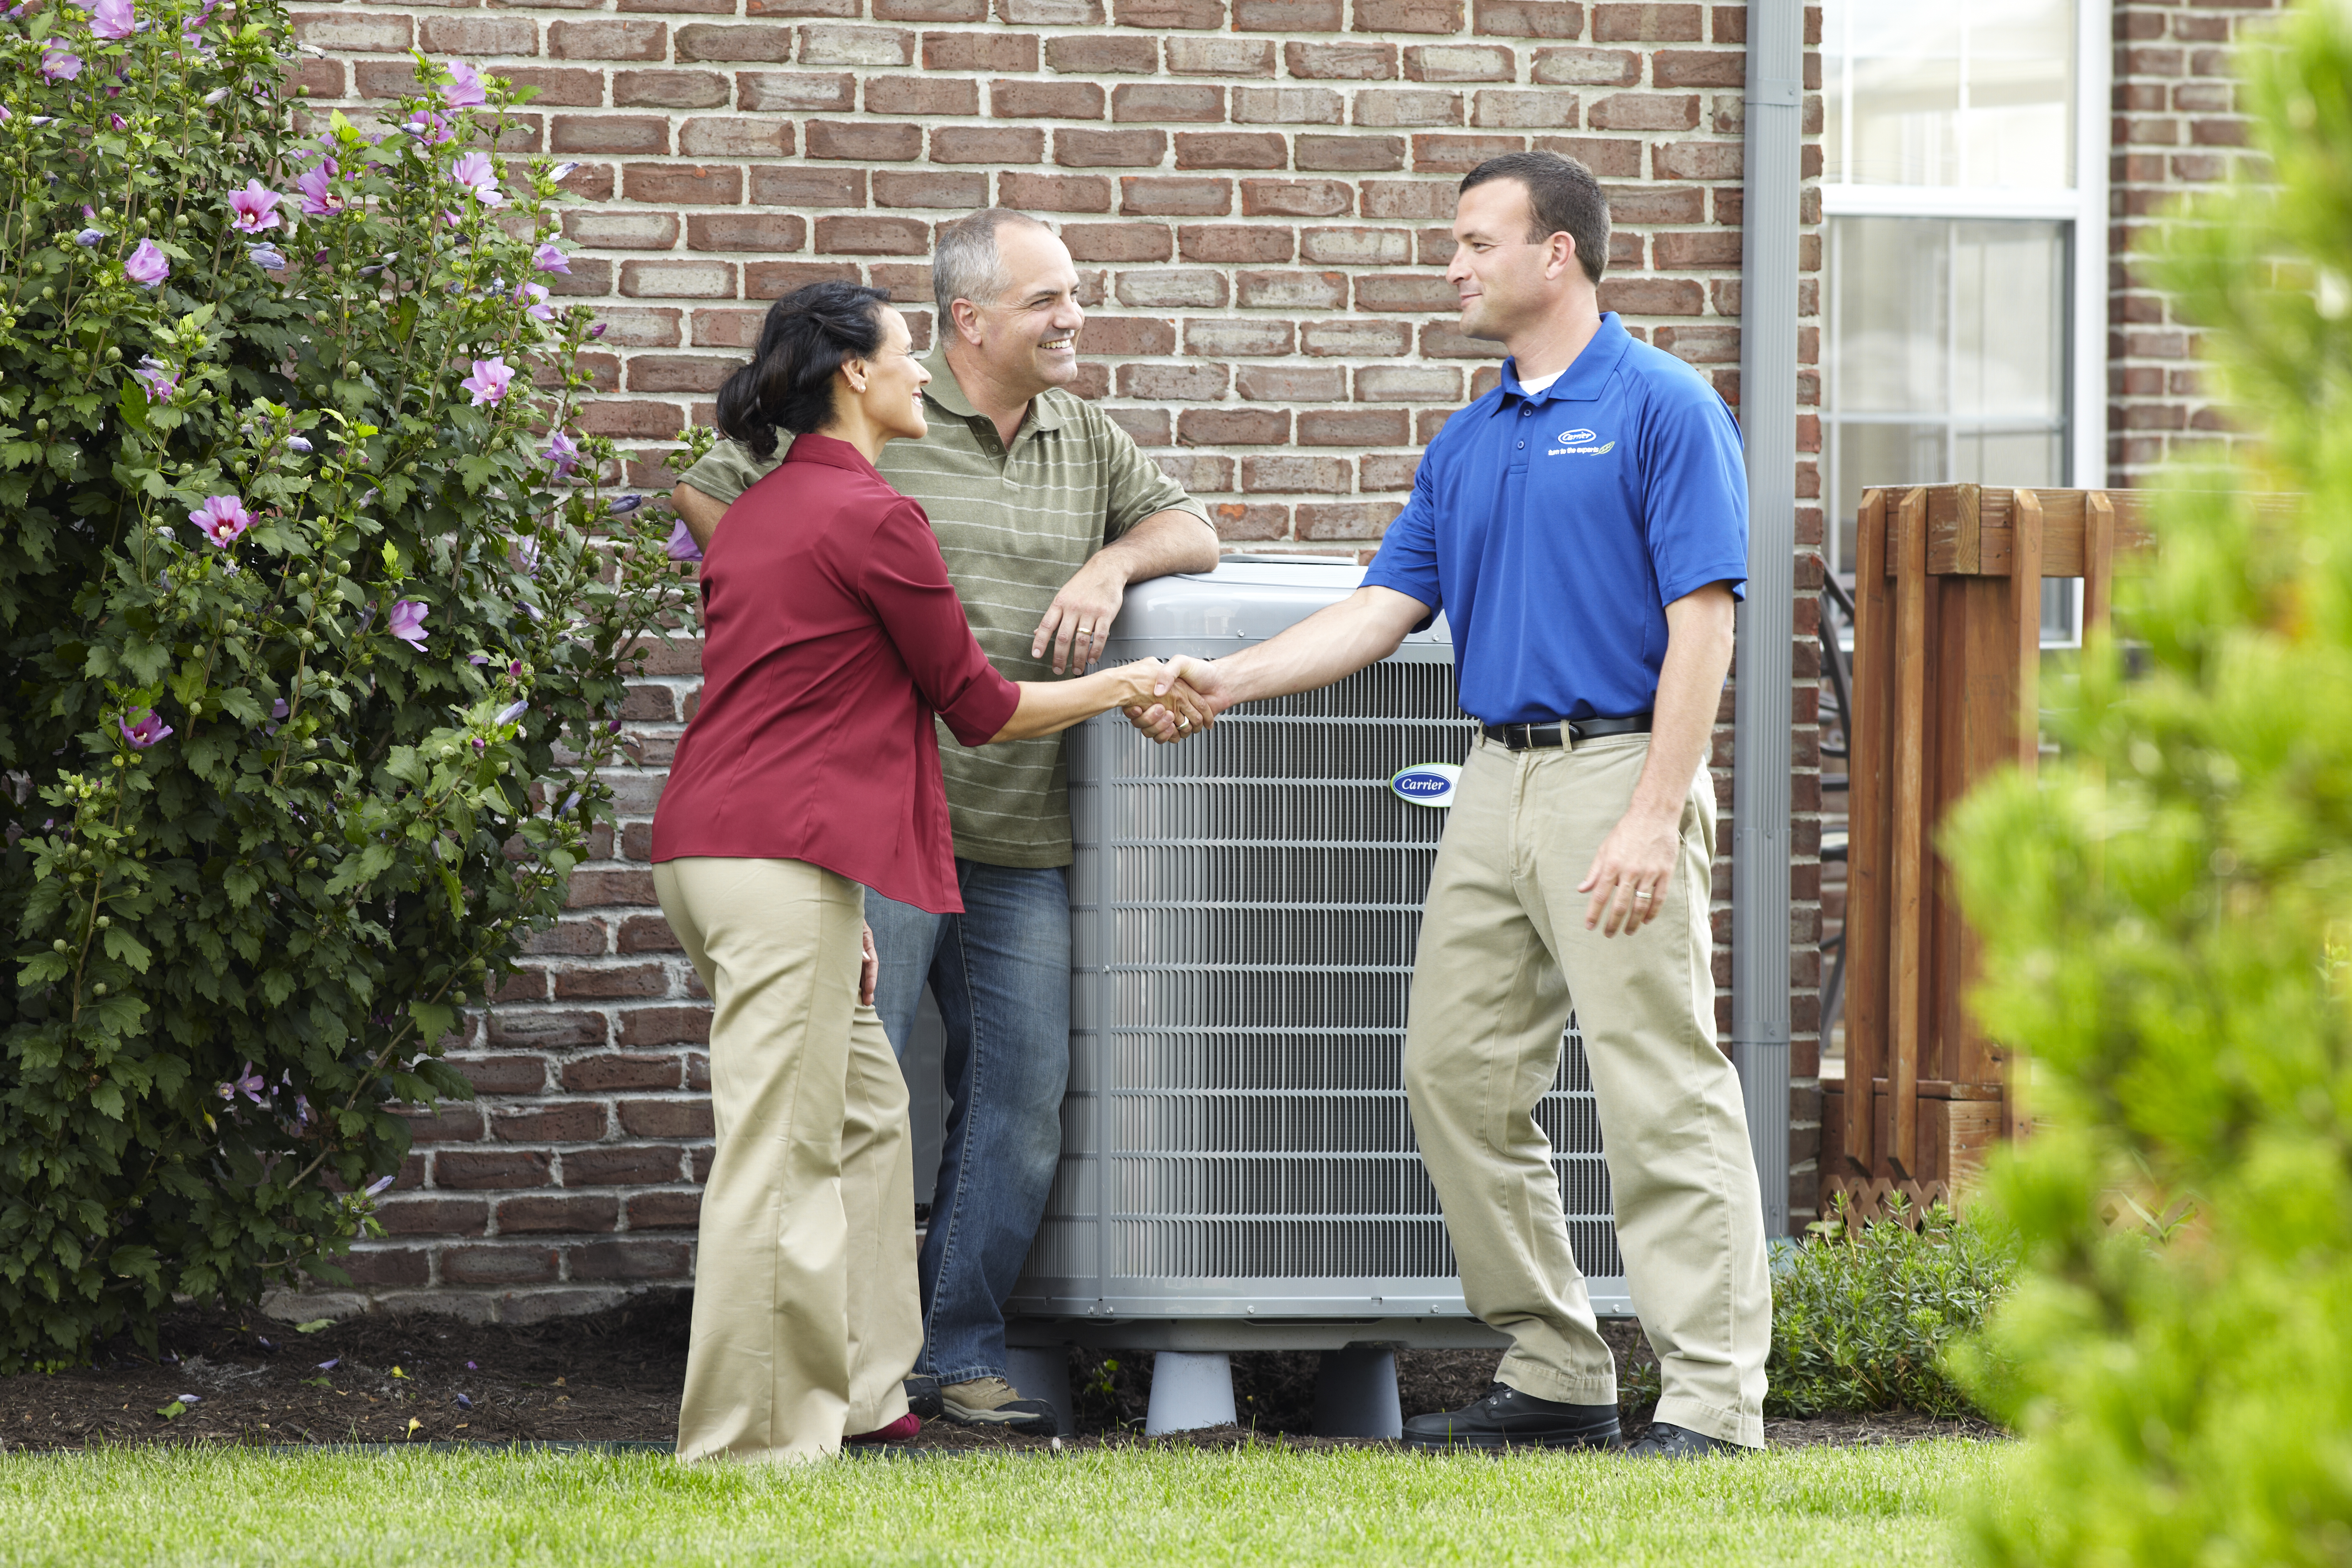 Technician shaking hands with customer after successful AC installation